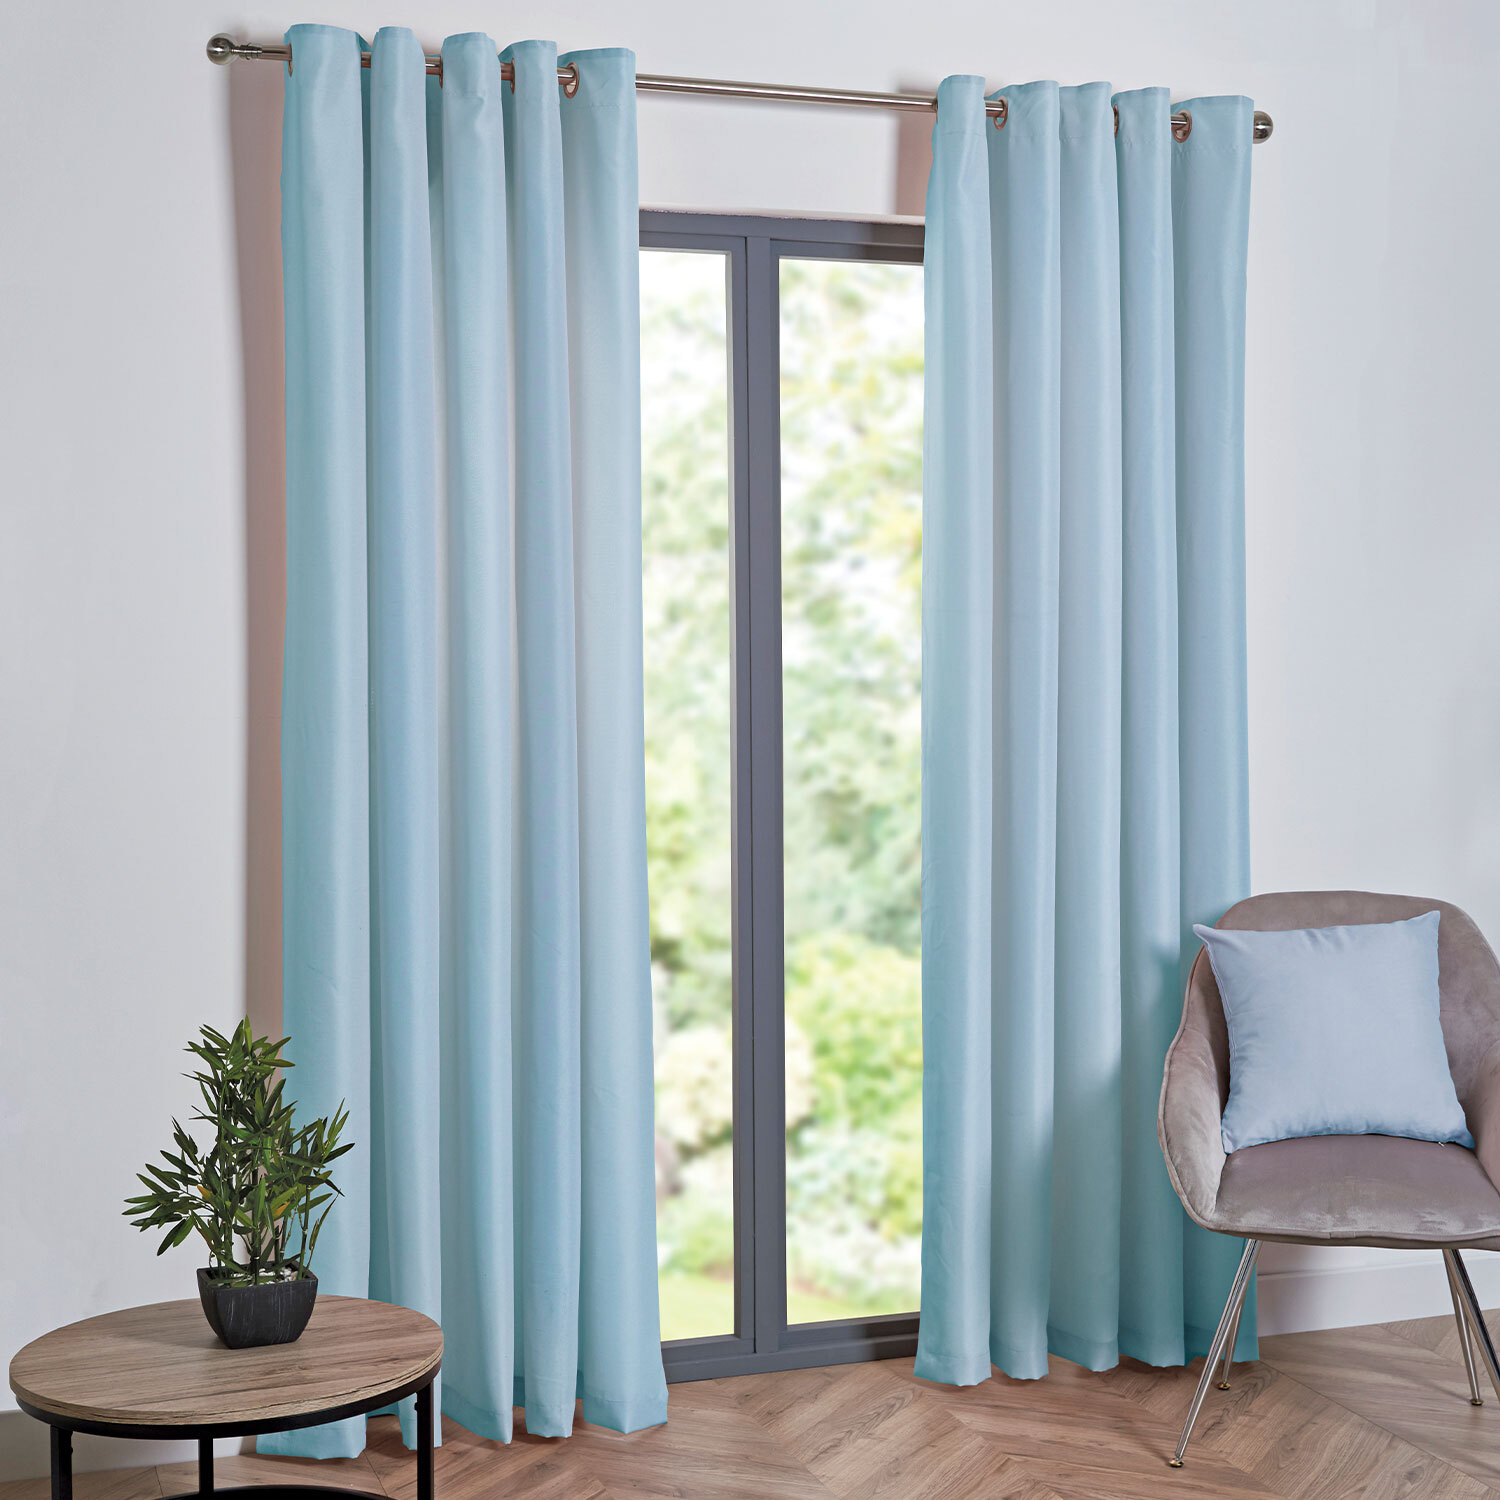 My Home Taylor Duck Egg Eyelet Curtains 229 x 229cm Image 1